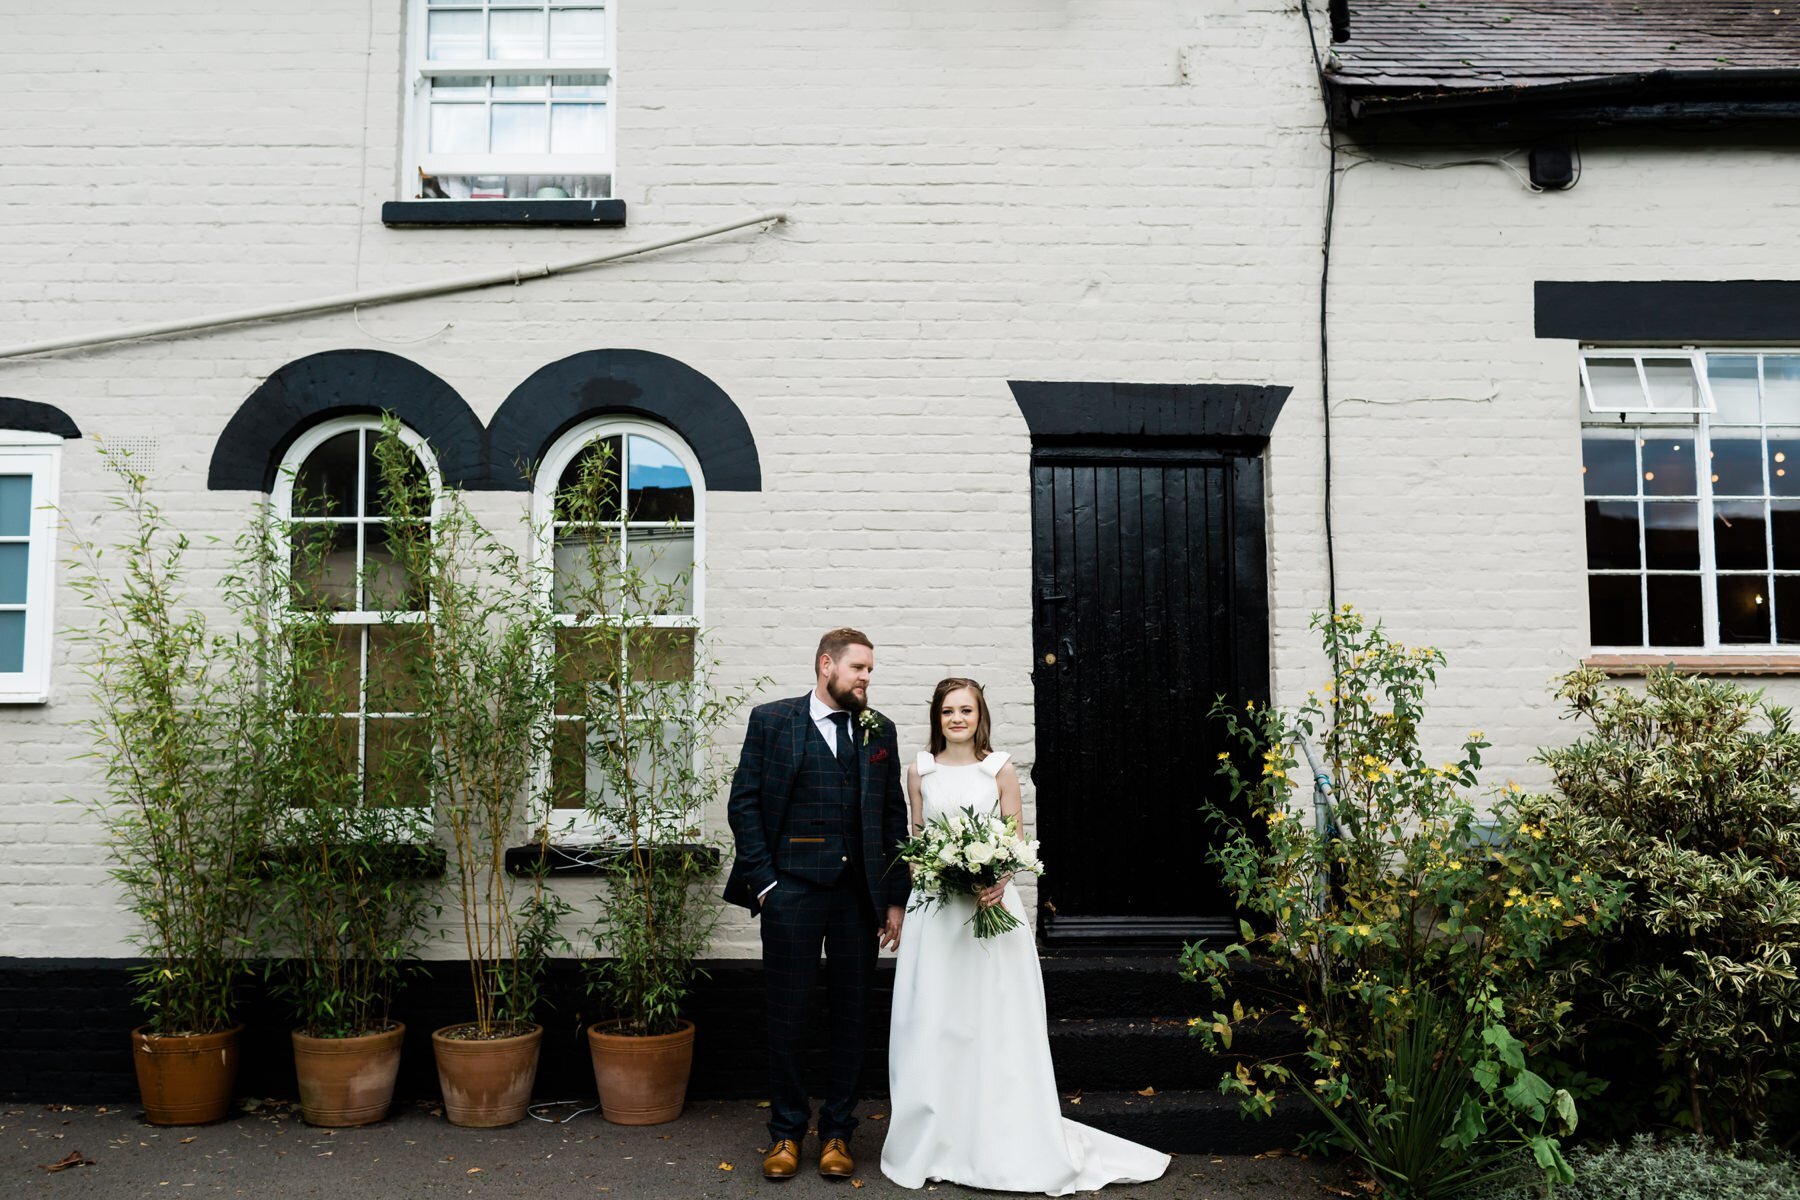 A bride and groom wedding portrait at Burley Manor in the New Forest